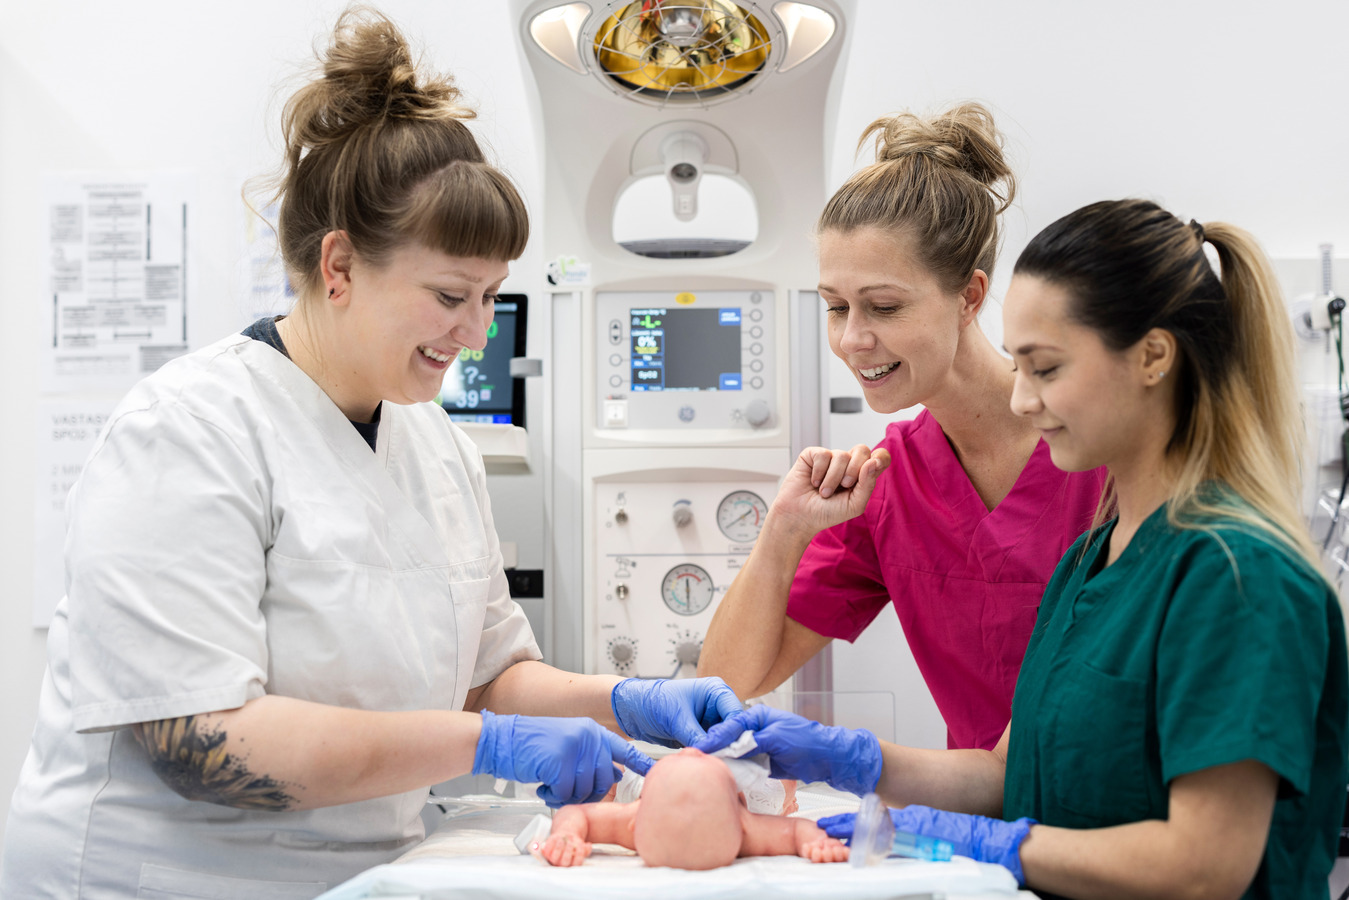 Two midwife students practicing with simulation baby.